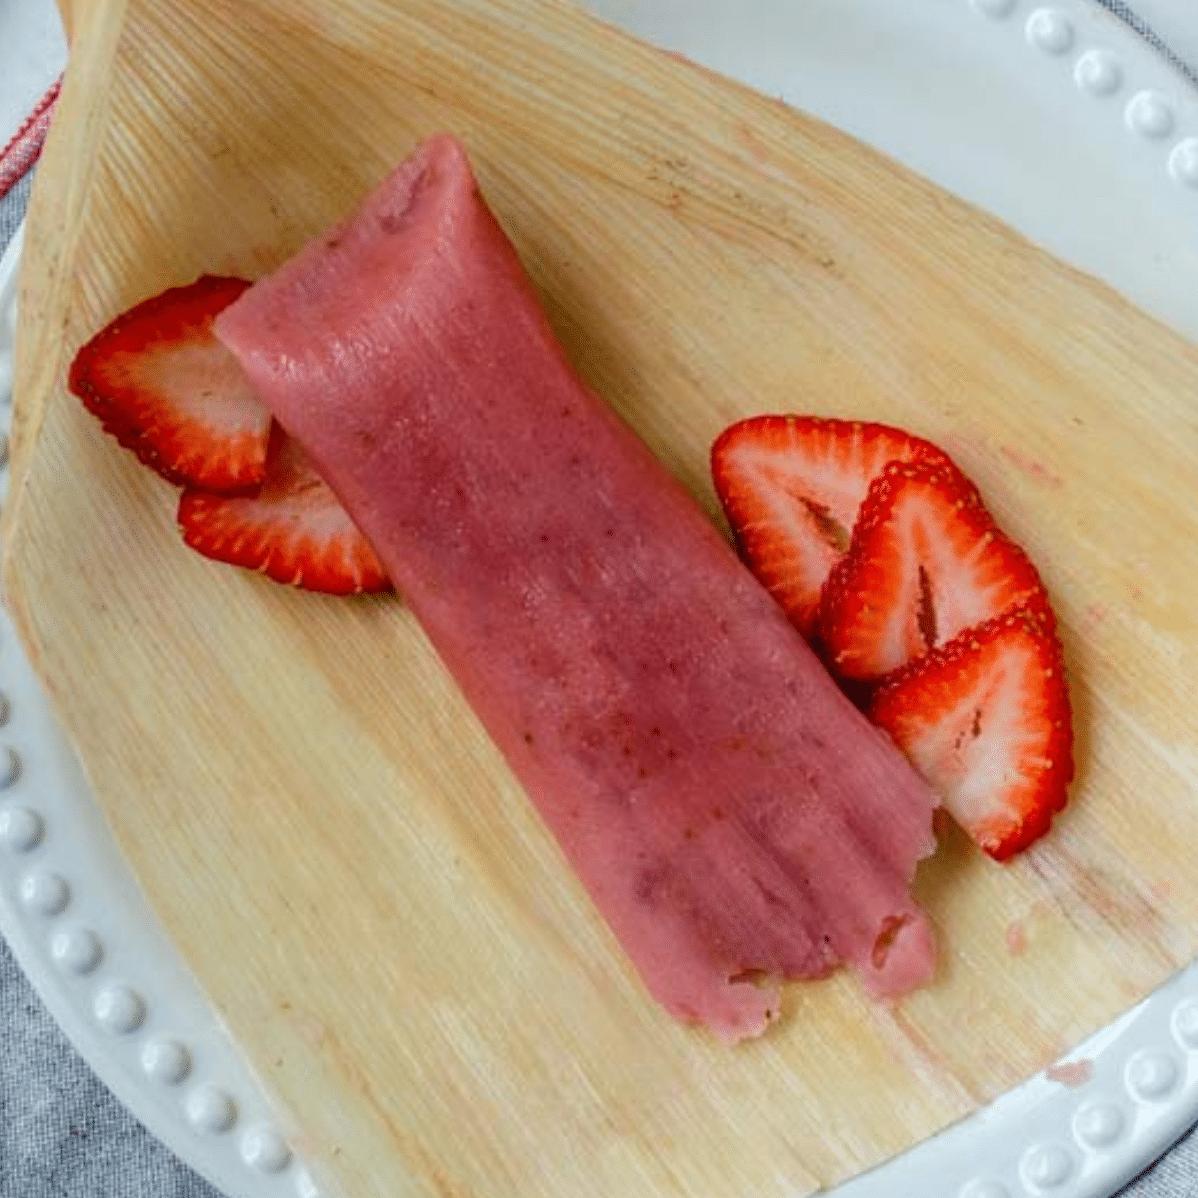  Sweeten up your tamale game with these strawberry-filled tamales! 🍓🌽